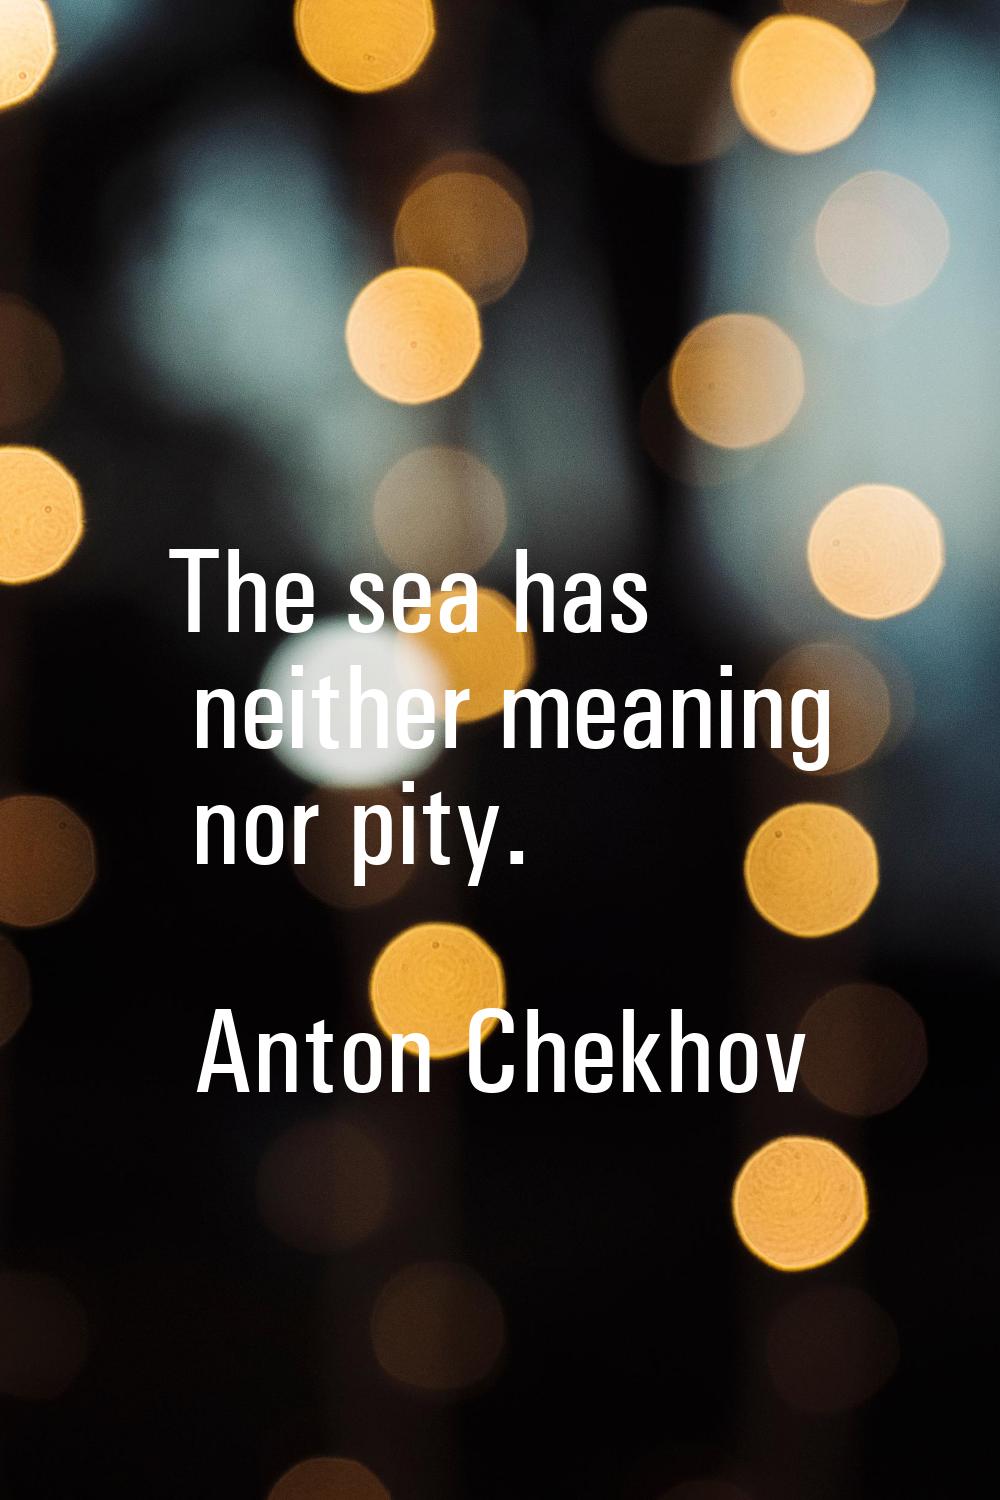 The sea has neither meaning nor pity.